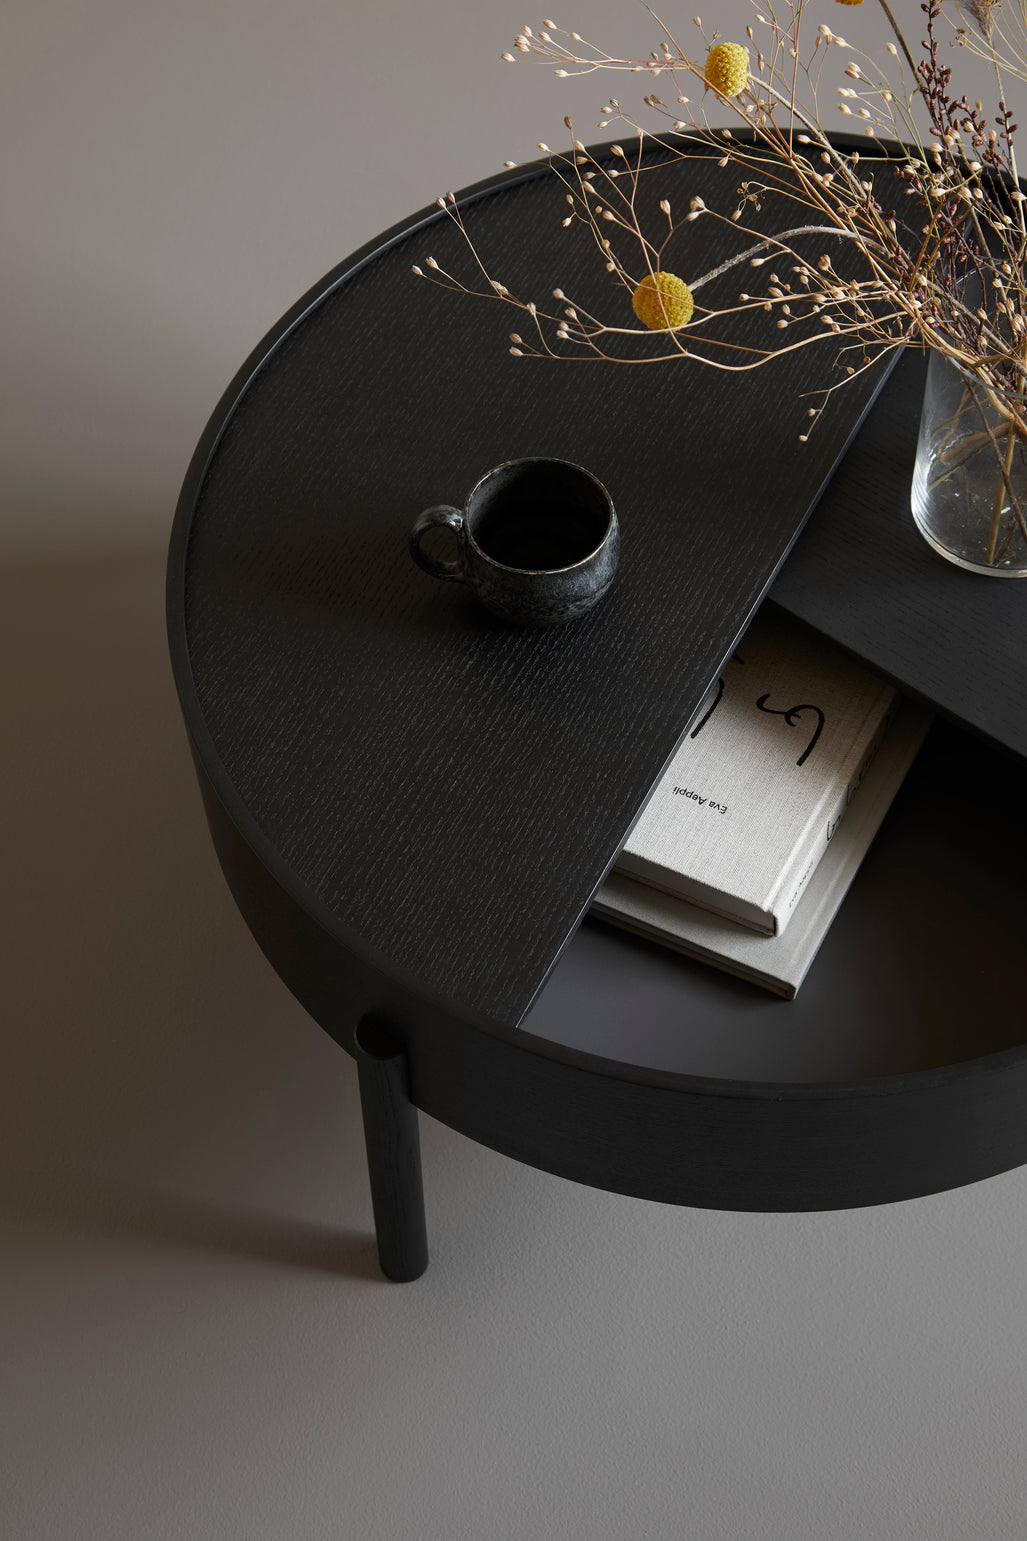 arc coffee table (66 cm) - black by woud at adorn.house